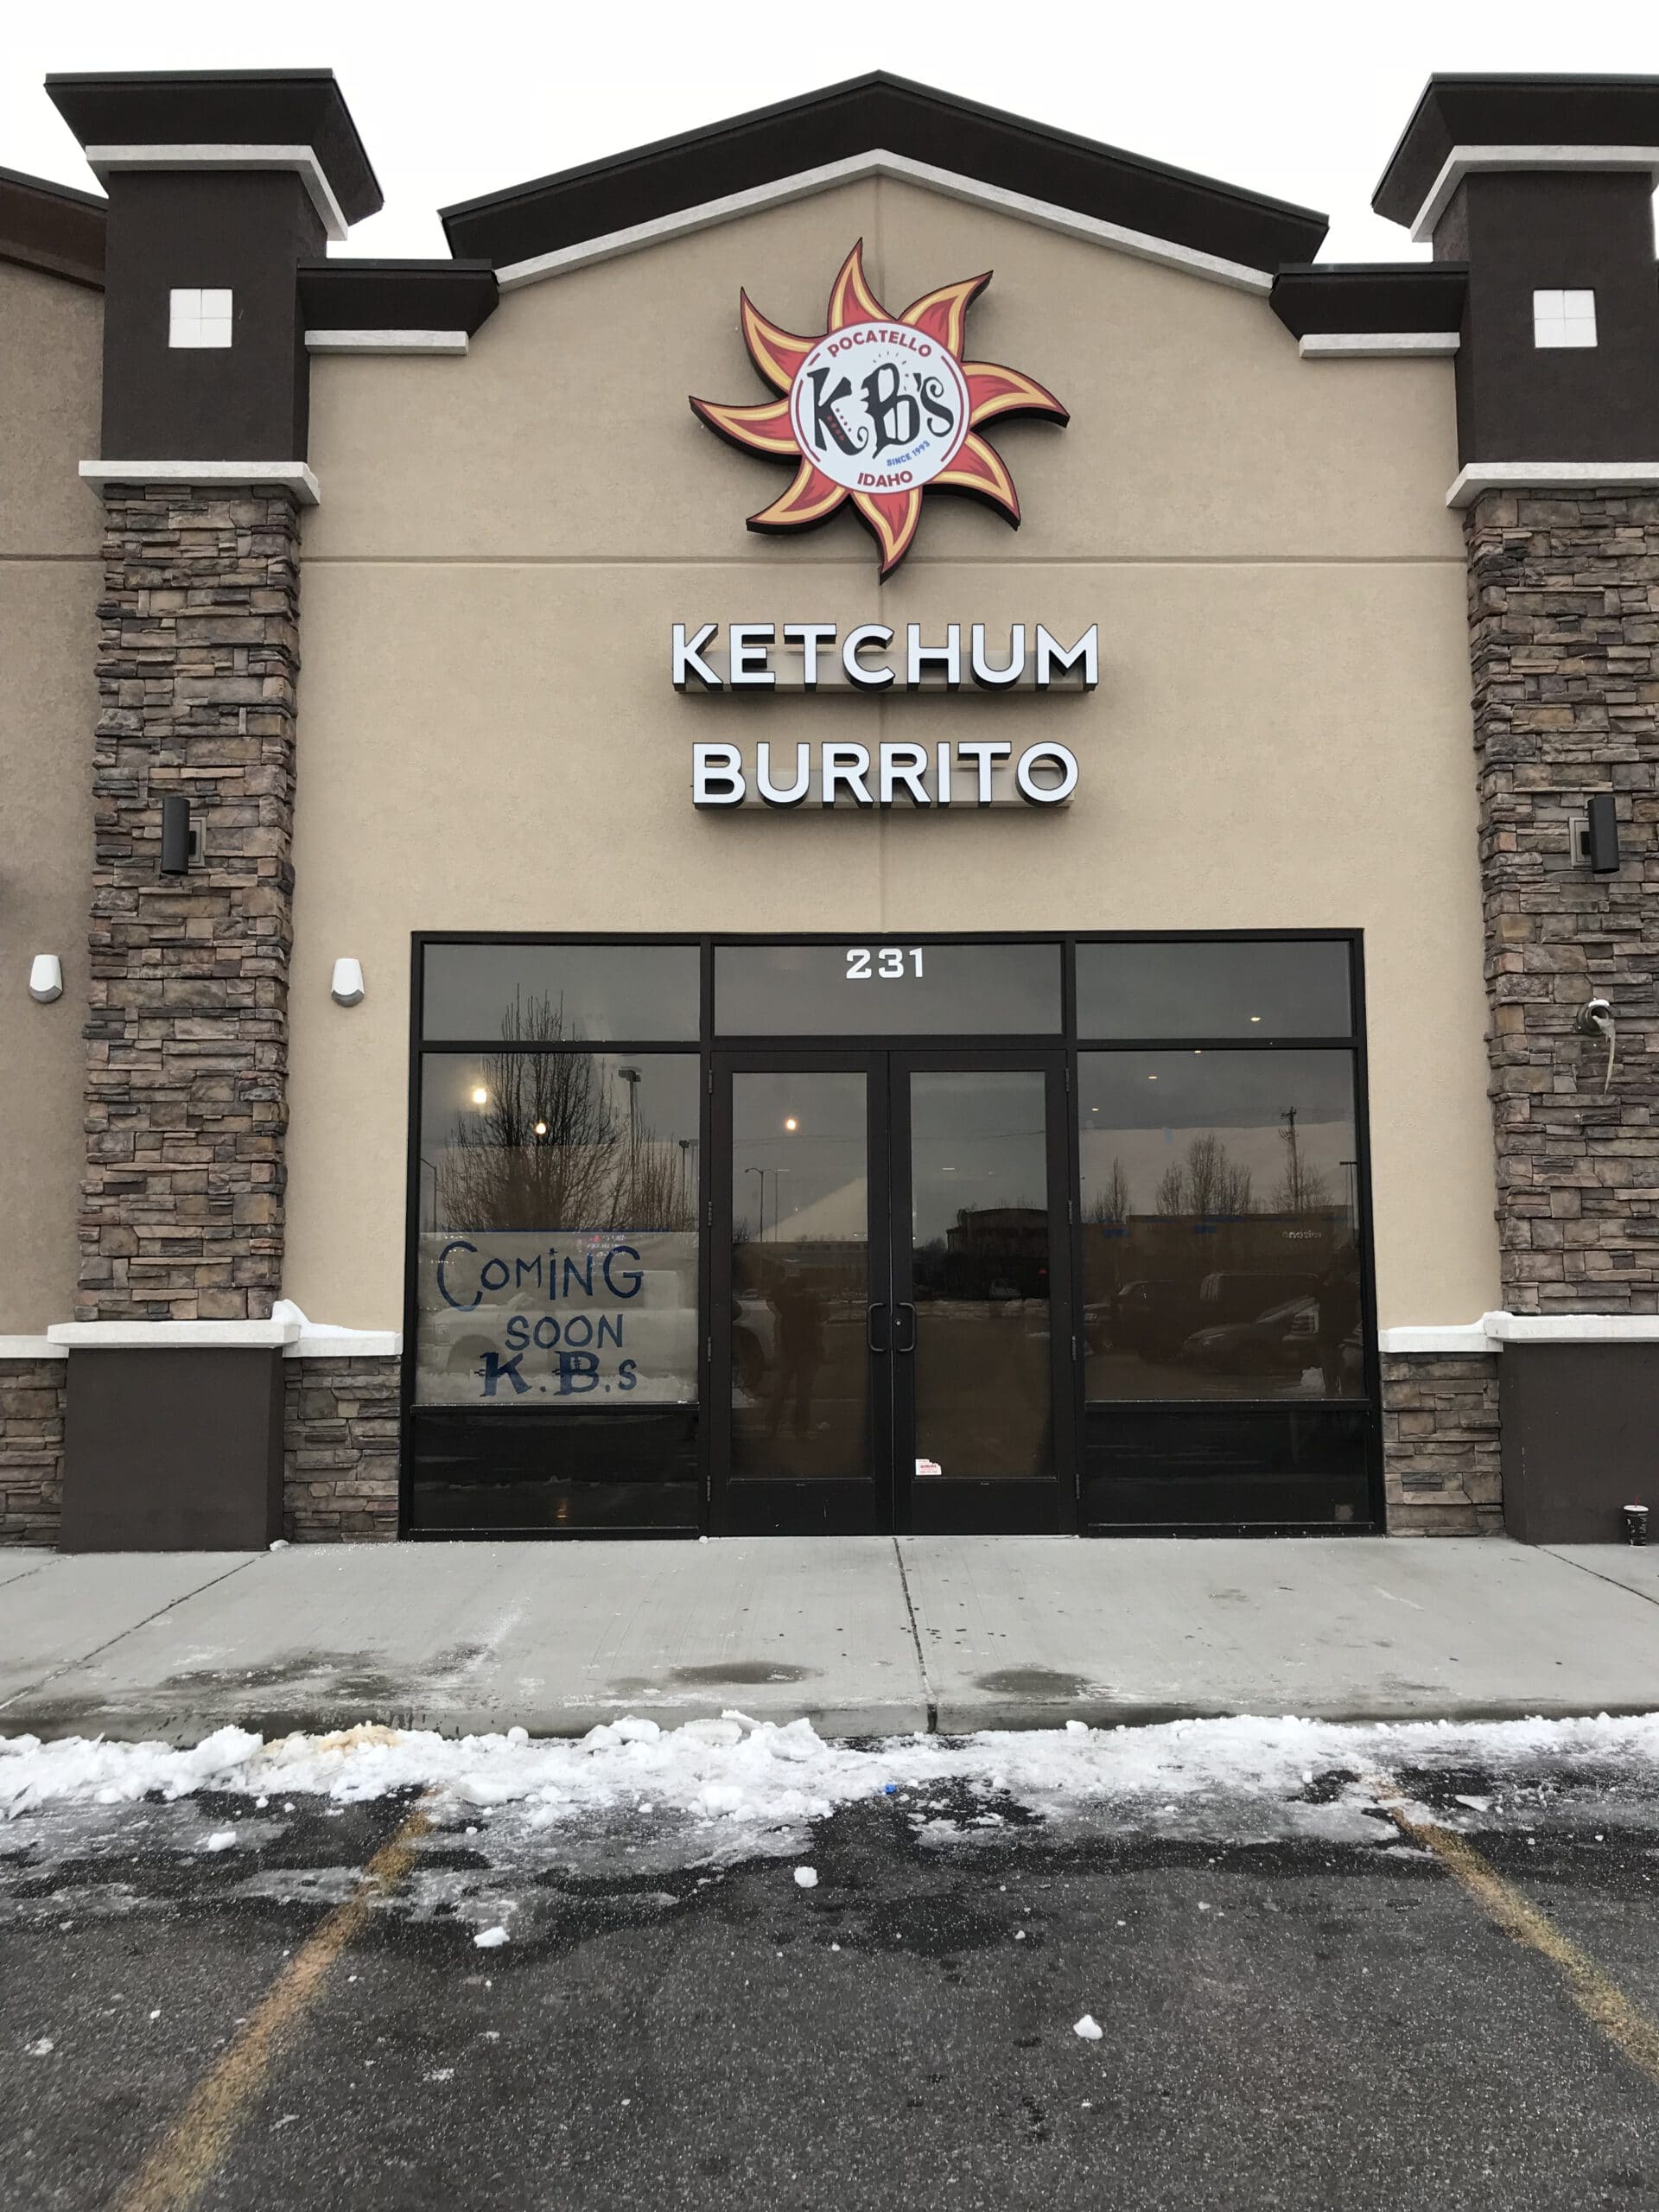 Ketchum Burrito Channel Letter Sign